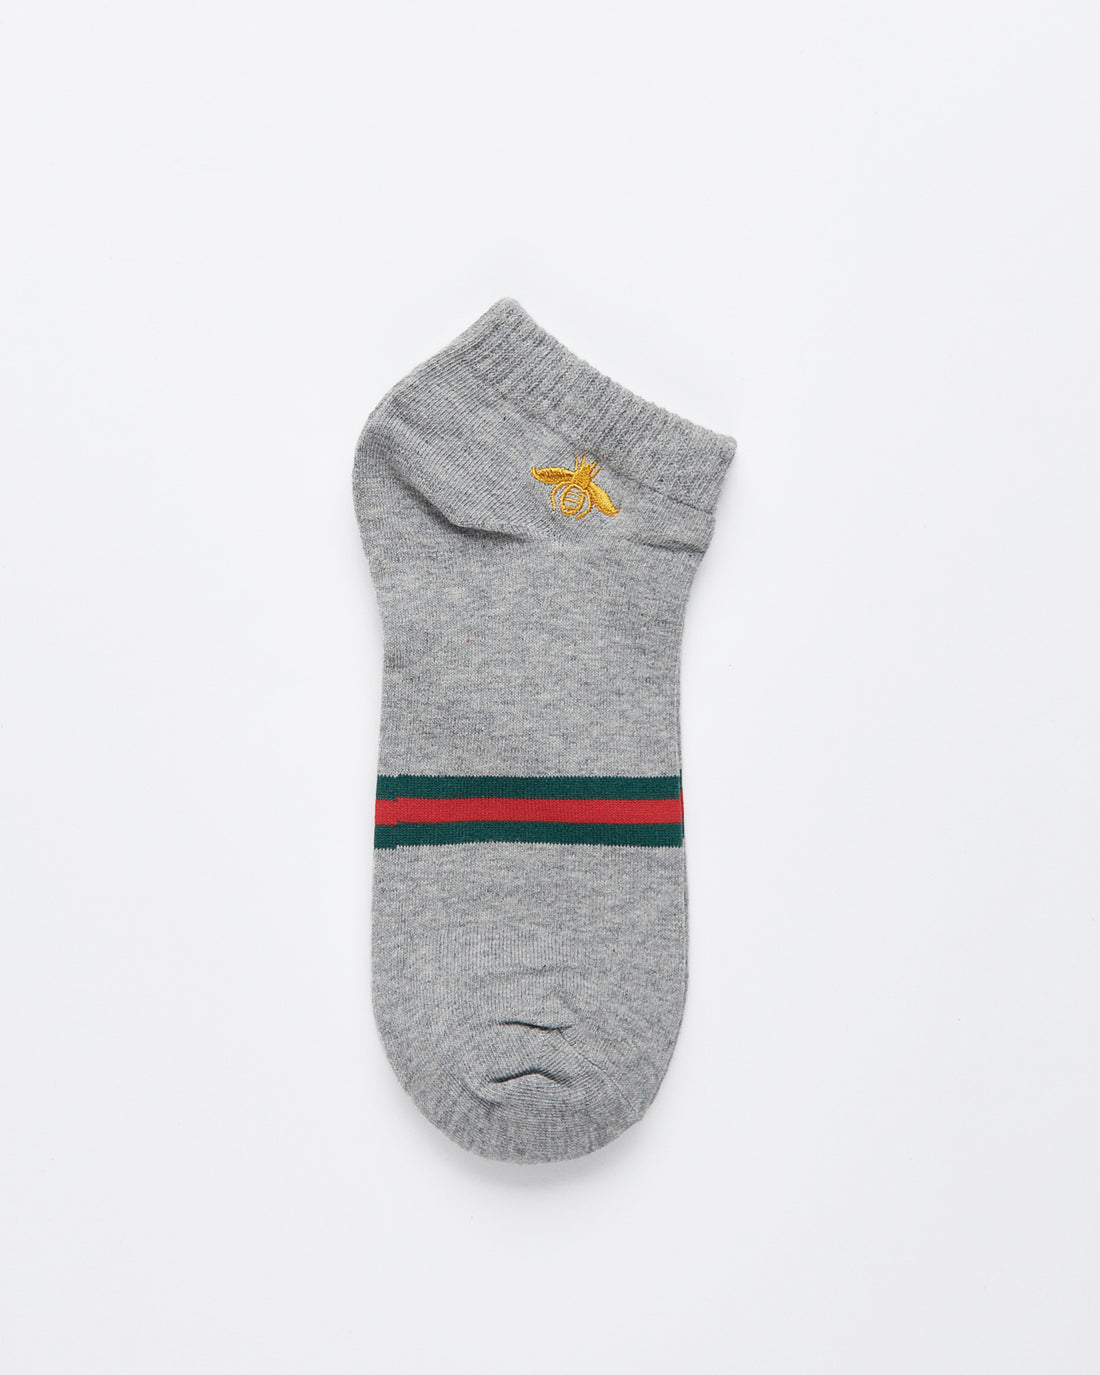 GUC Bee Embroidered Grey Low Cut 1 Pairs Socks 1.90